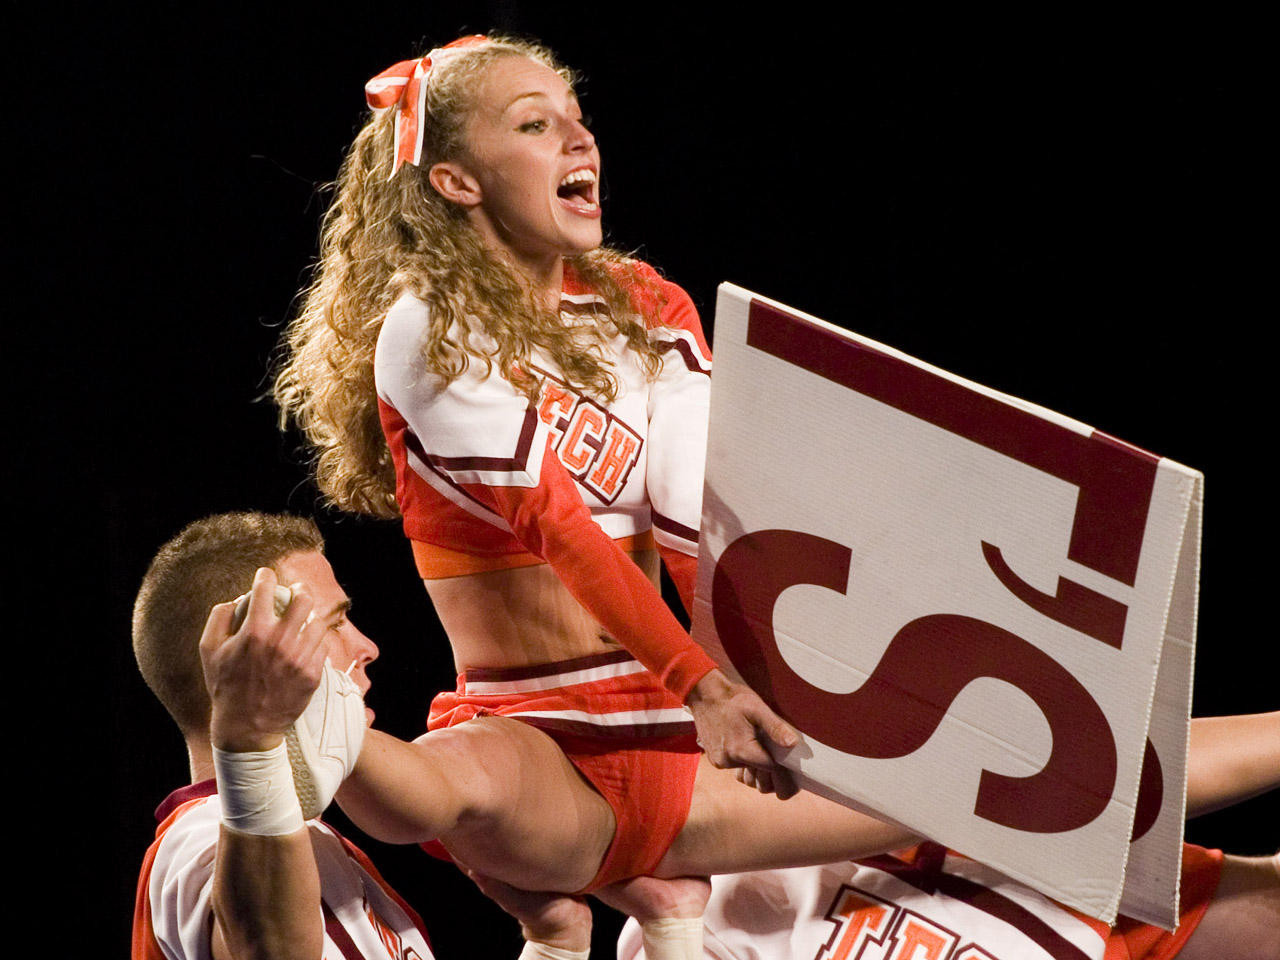 Experience the thrill of the upskirt cheerleaders in these racy photos